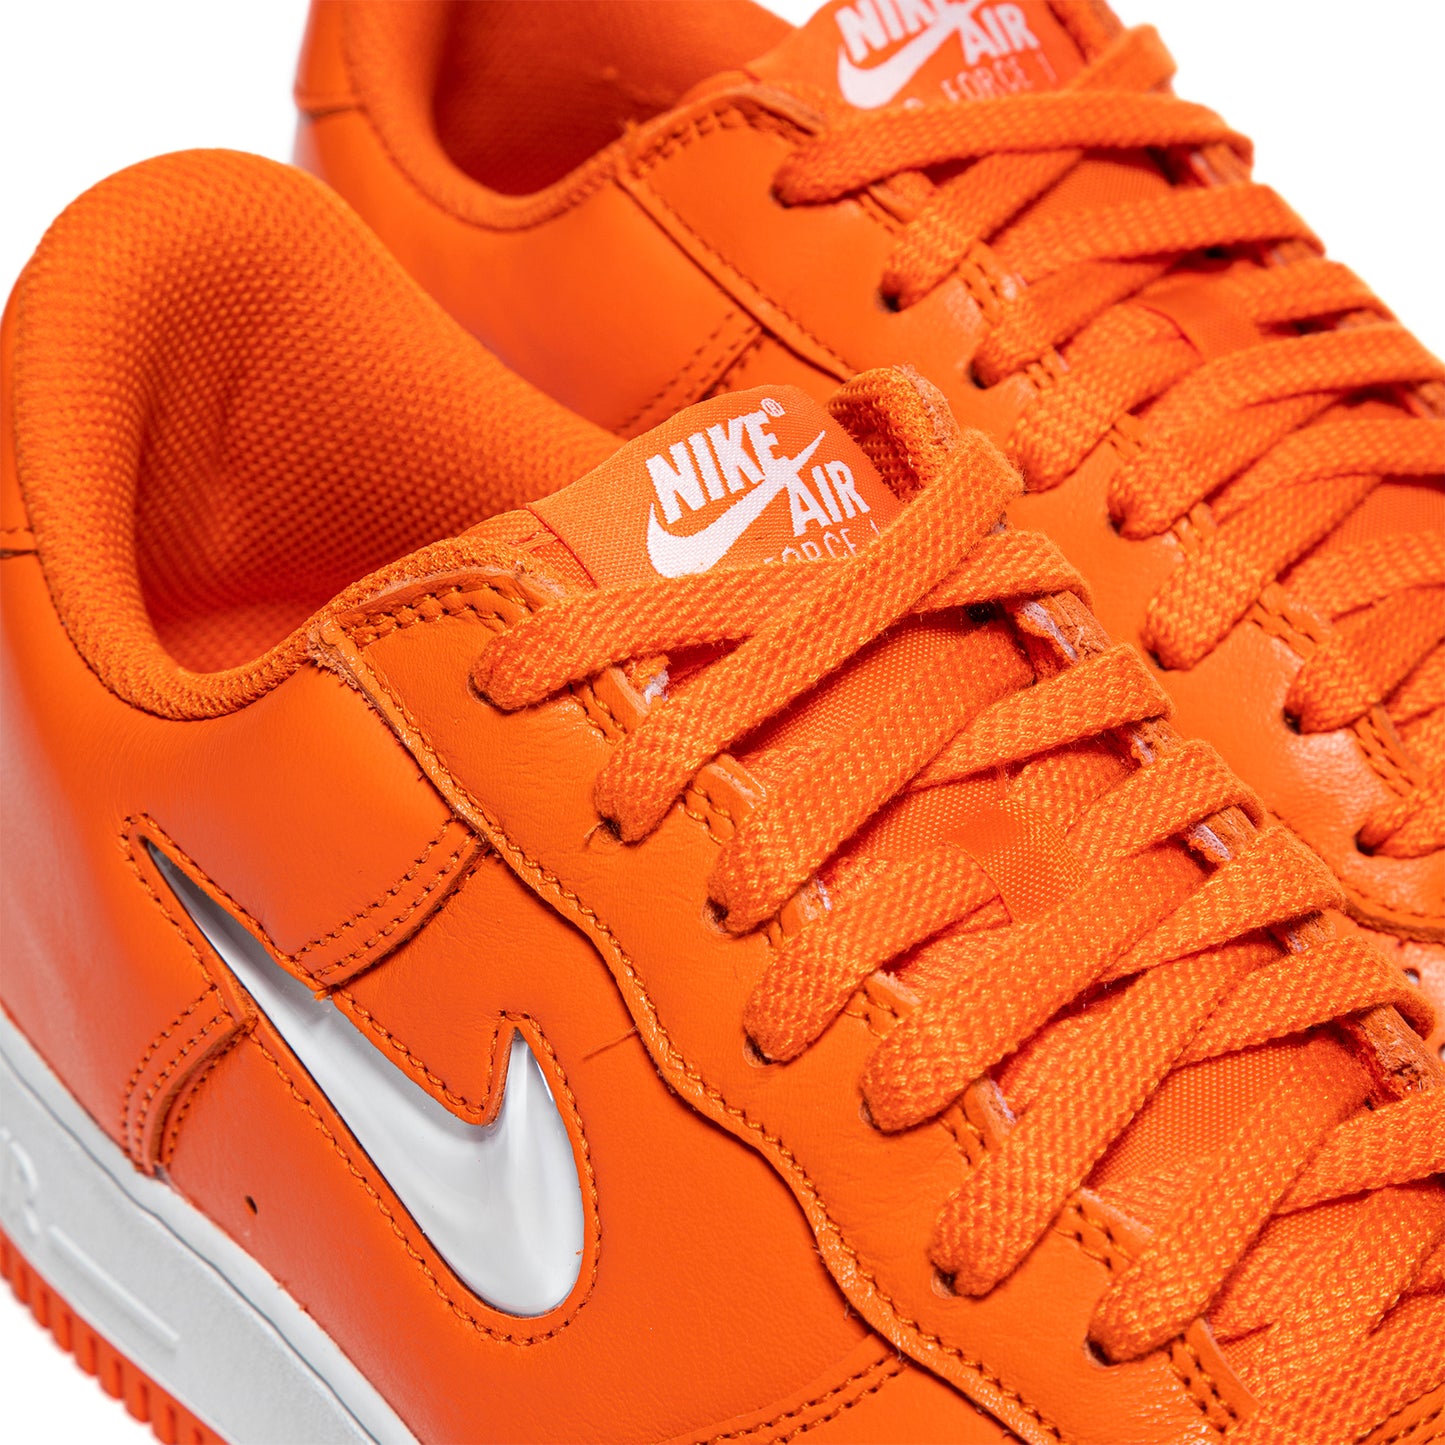 Nike Air Force 1 Low Retro Sneakers in Safety Orange & Summit White